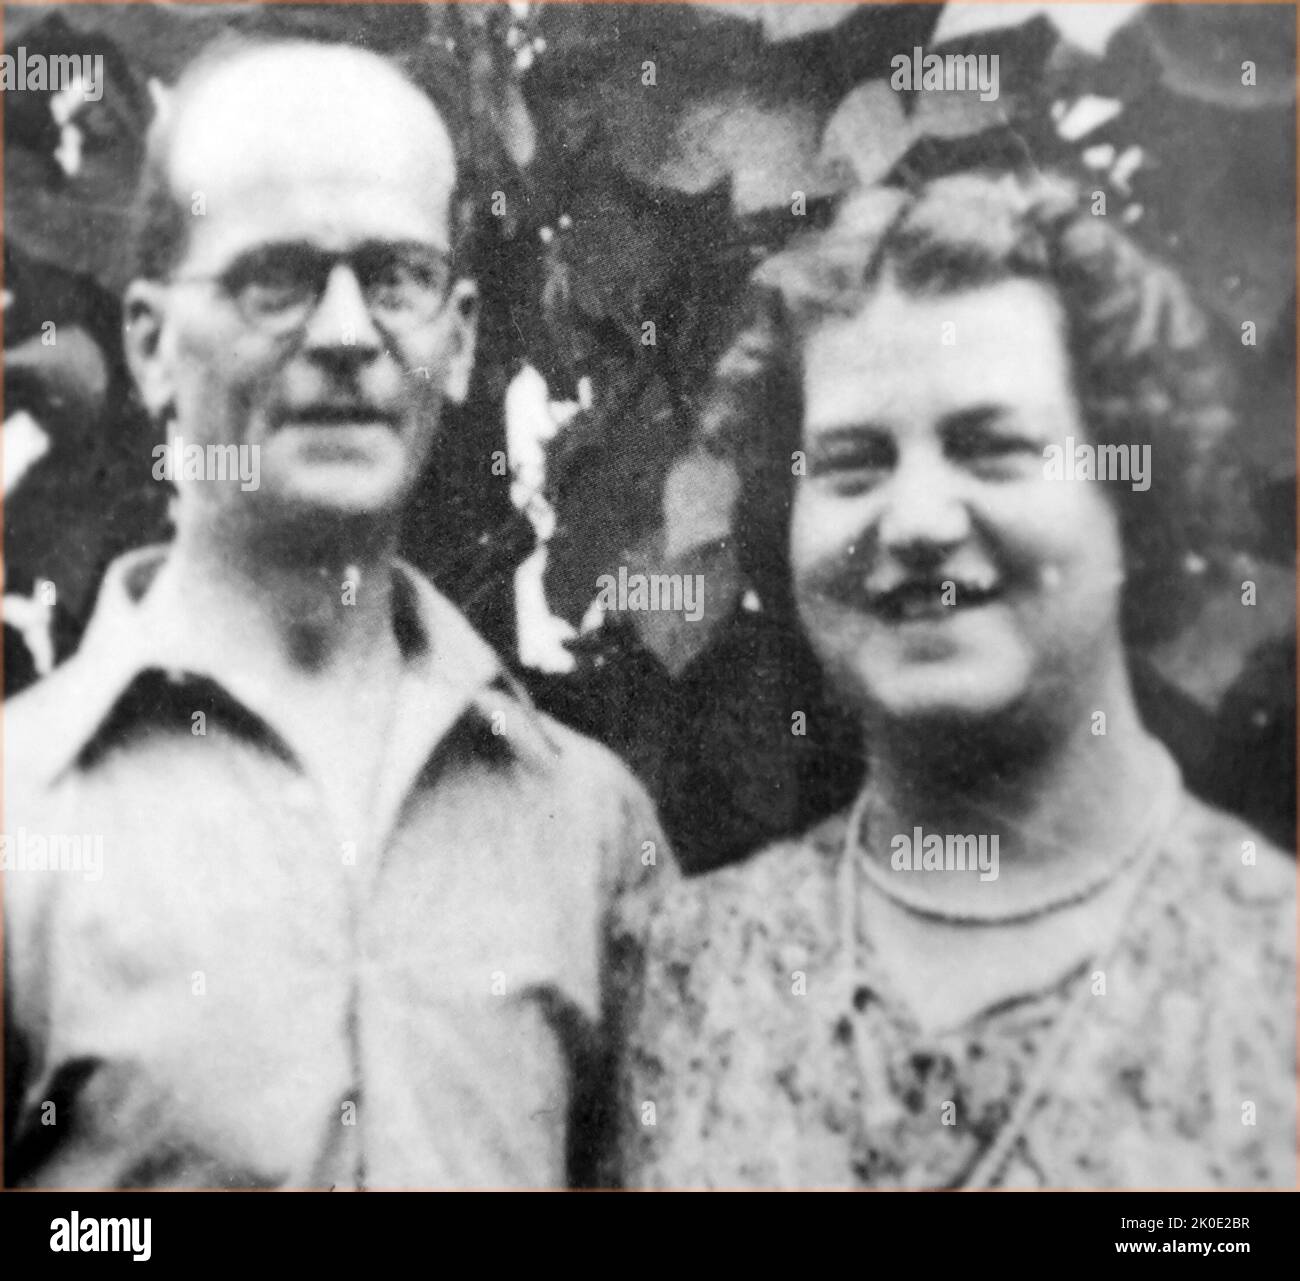 John Christie with his wife Ethel. John Reginald Halliday Christie (8 April 1899 - 15 July 1953), known to his family and friends as Reg Christie, was an English serial killer and alleged necrophile active during the 1940s and early 1950s. He murdered at least eight people, including his wife, Ethel, in his flat at 10 Rillington Place, Notting Hill, London. Stock Photo